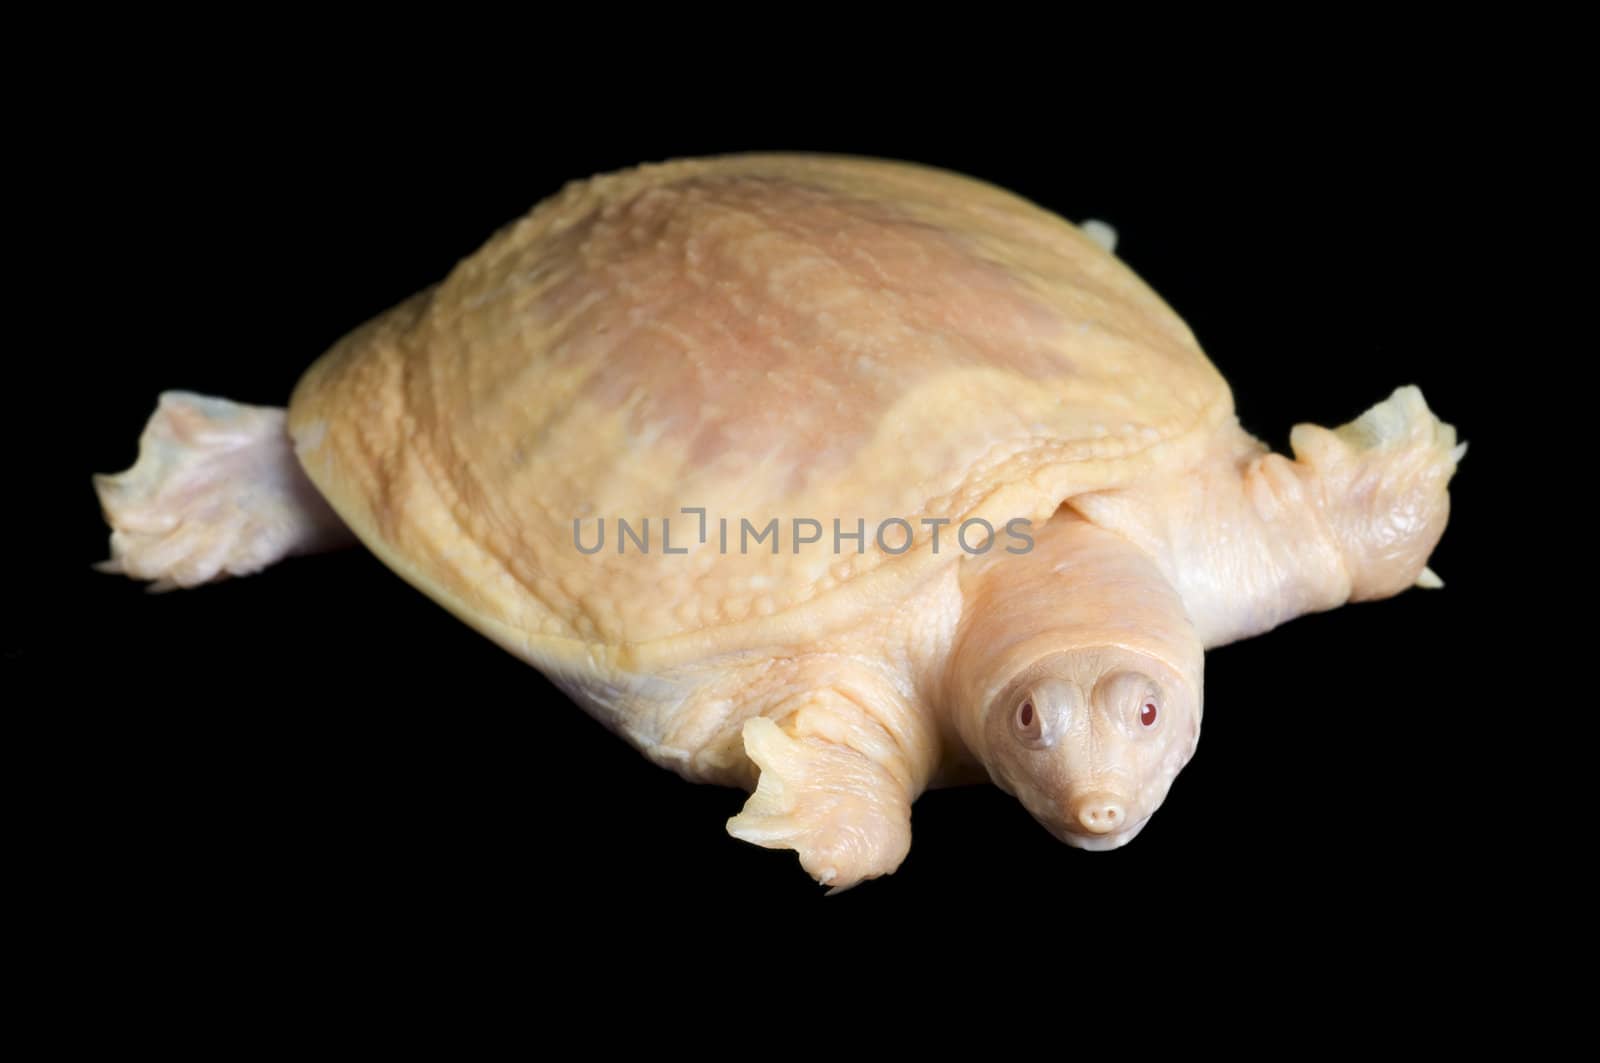 Albino Chinese Soft-shell turtle by Njean